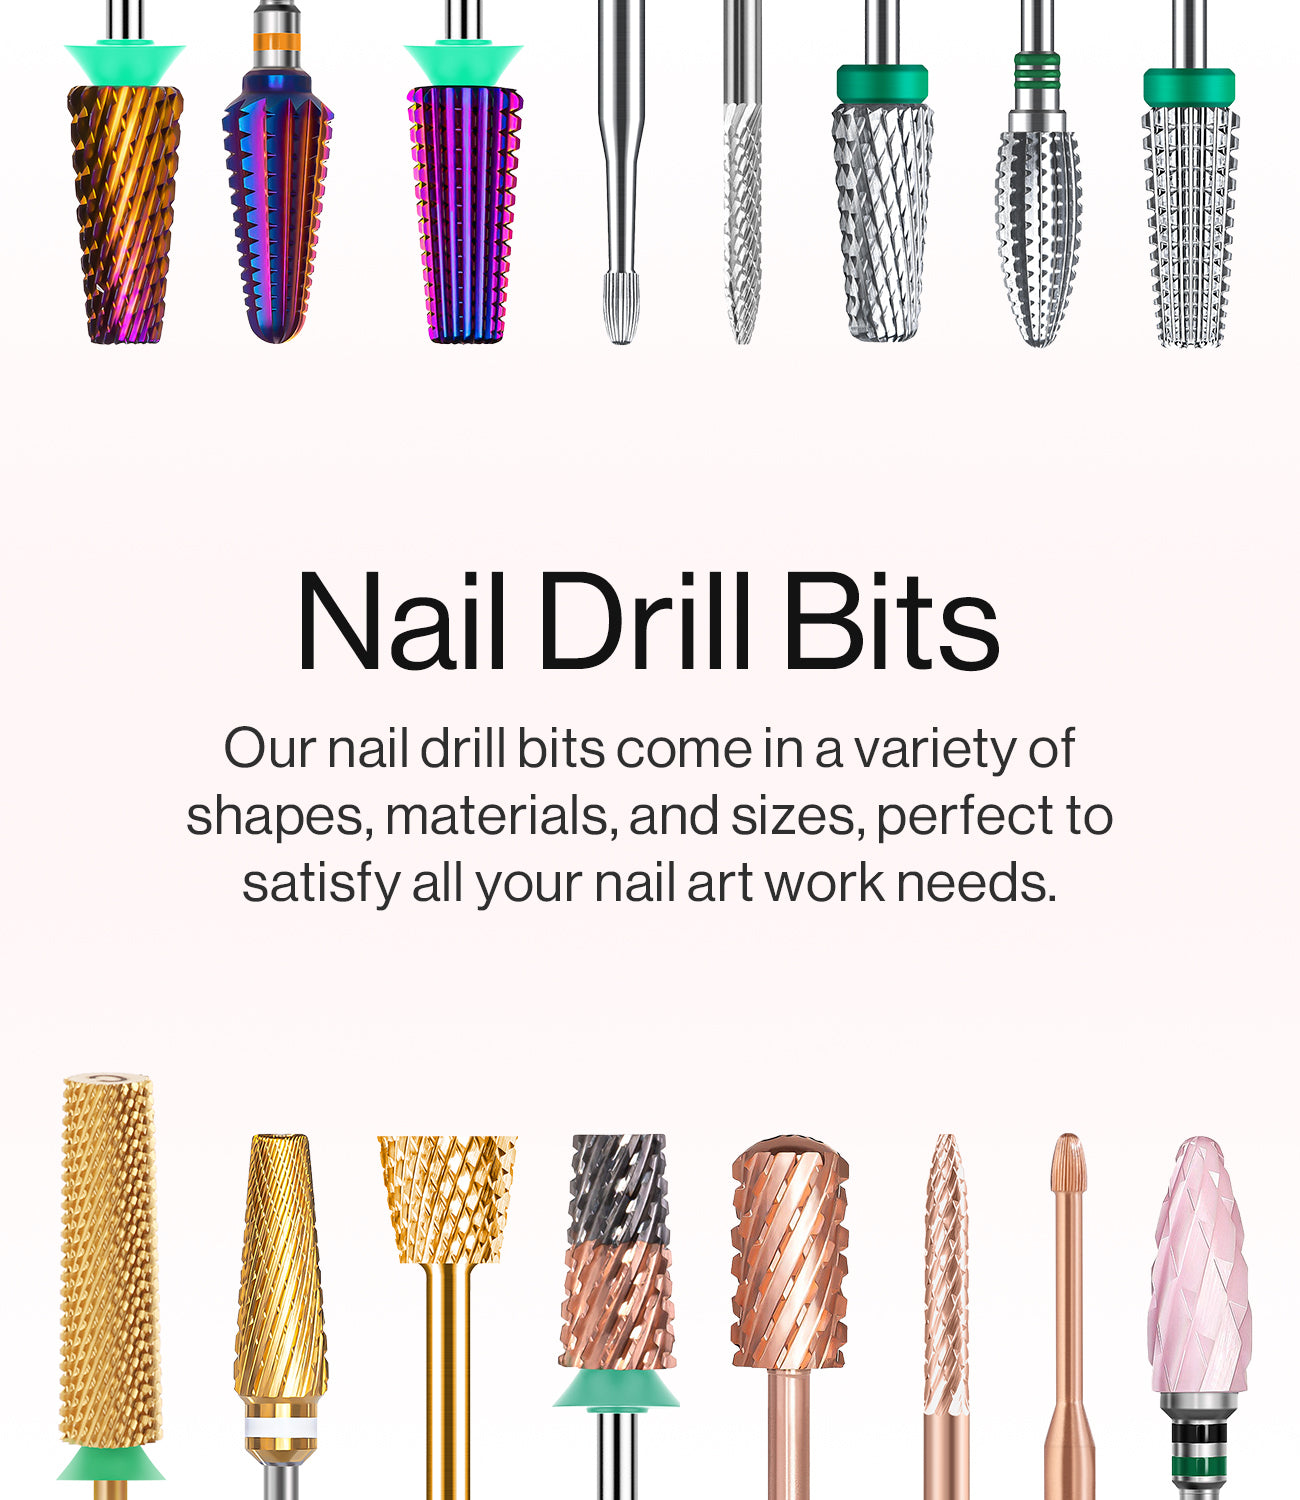 Professional Nail Drill Bits in a Variety of Shapes, Materials, and Sizes